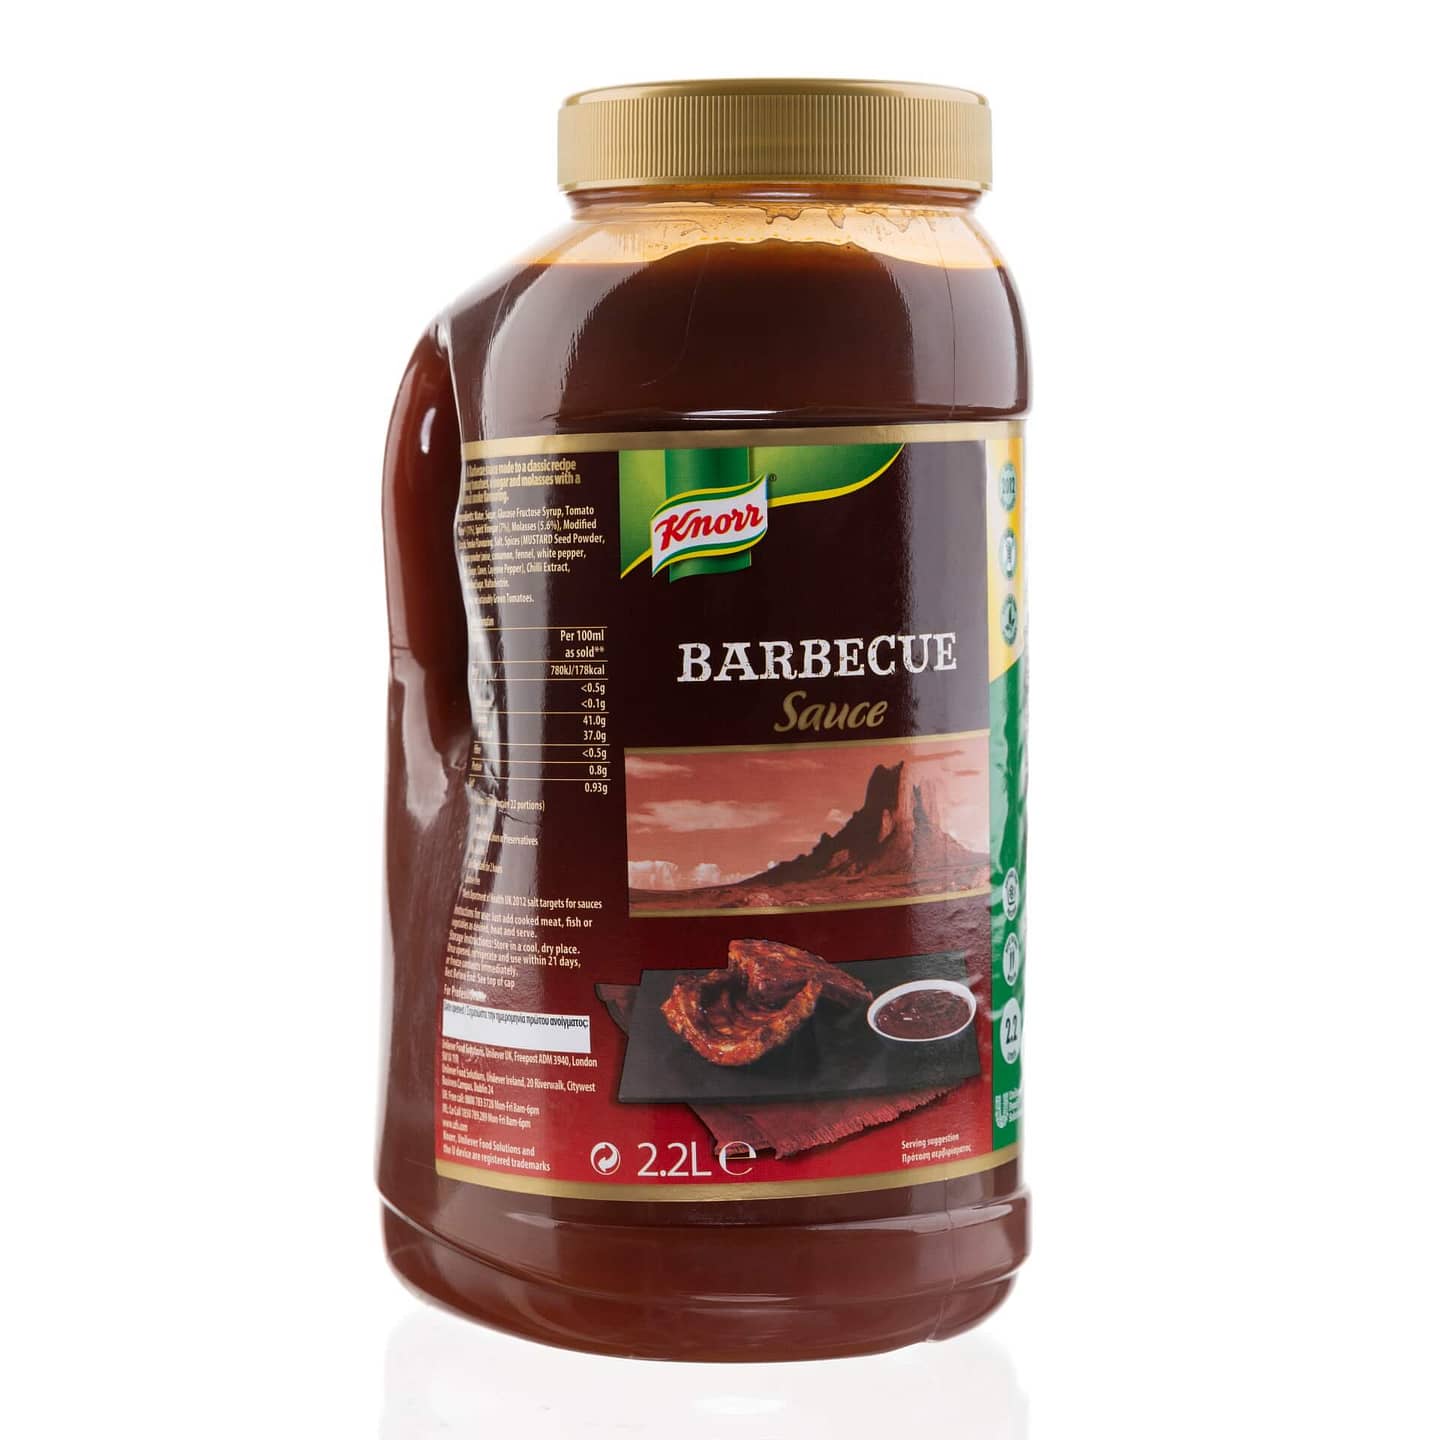 KNORR barbecue sauce